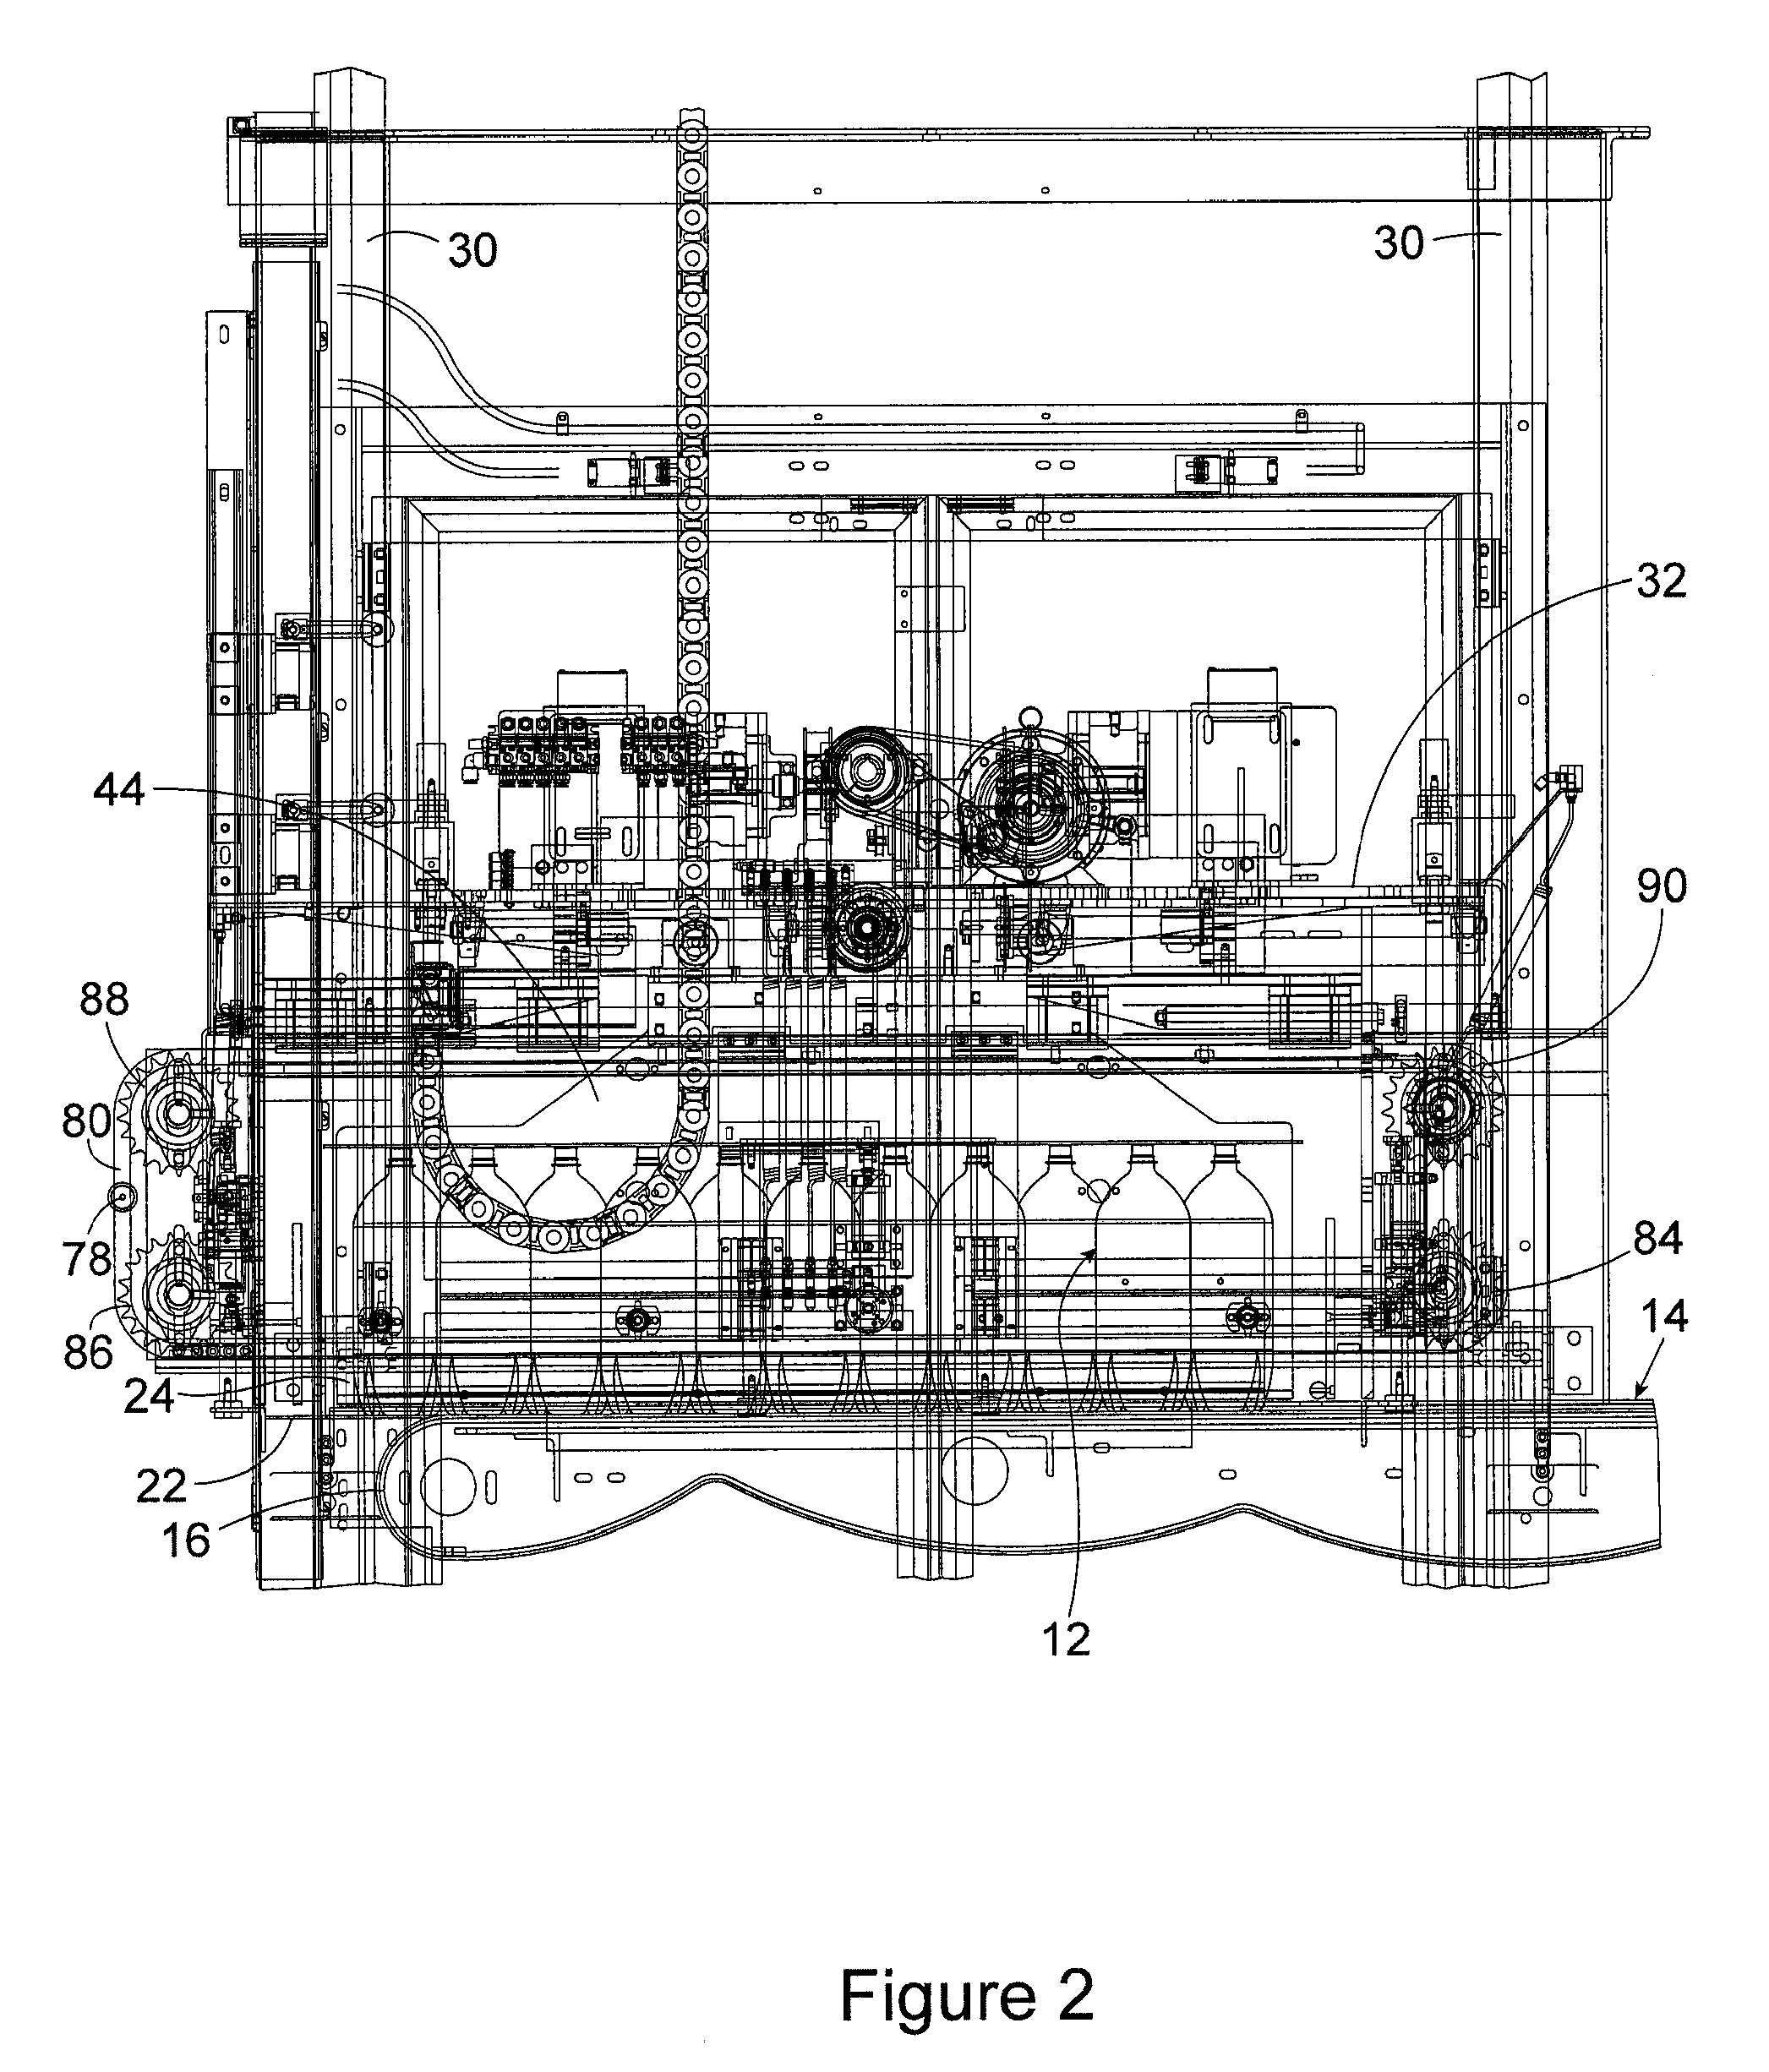 Conveyor system apparatus for stacking arrayed layers of objects